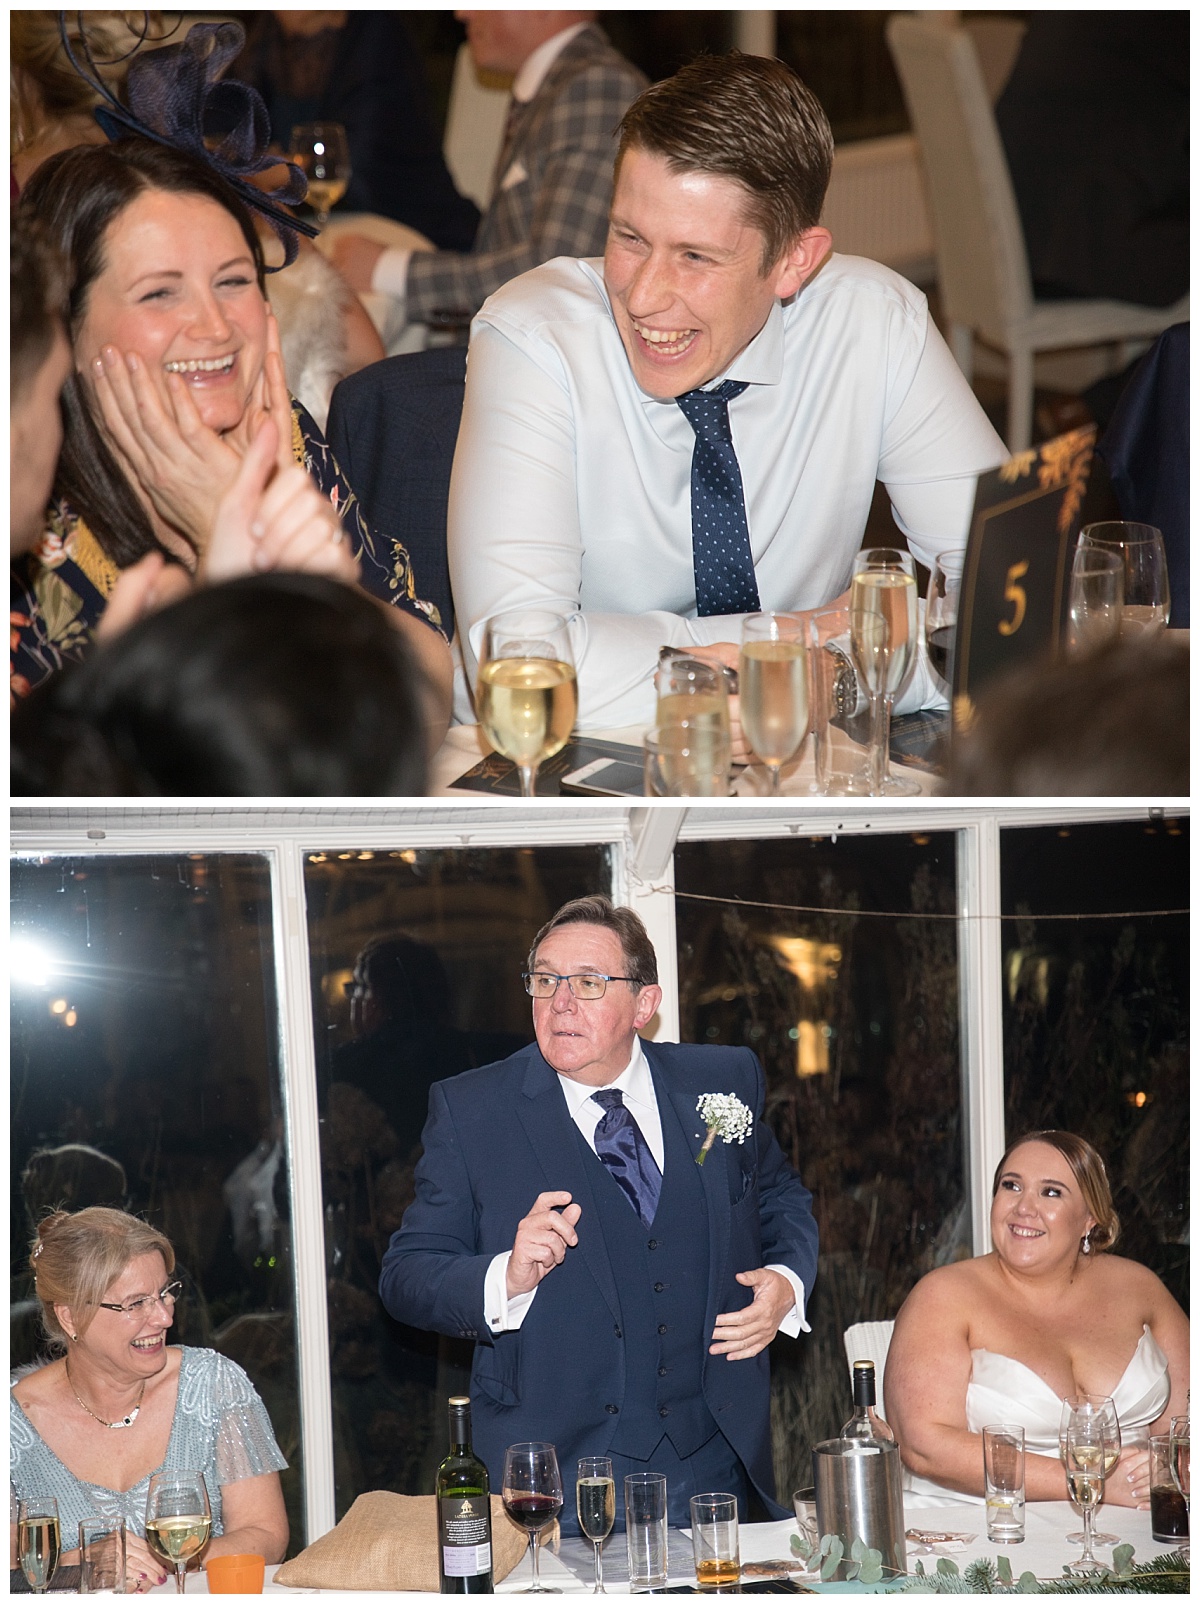 Wedding Photography Manchester - Lorna and Vinny's Abbeywood Estate and Gardens Wedding 113